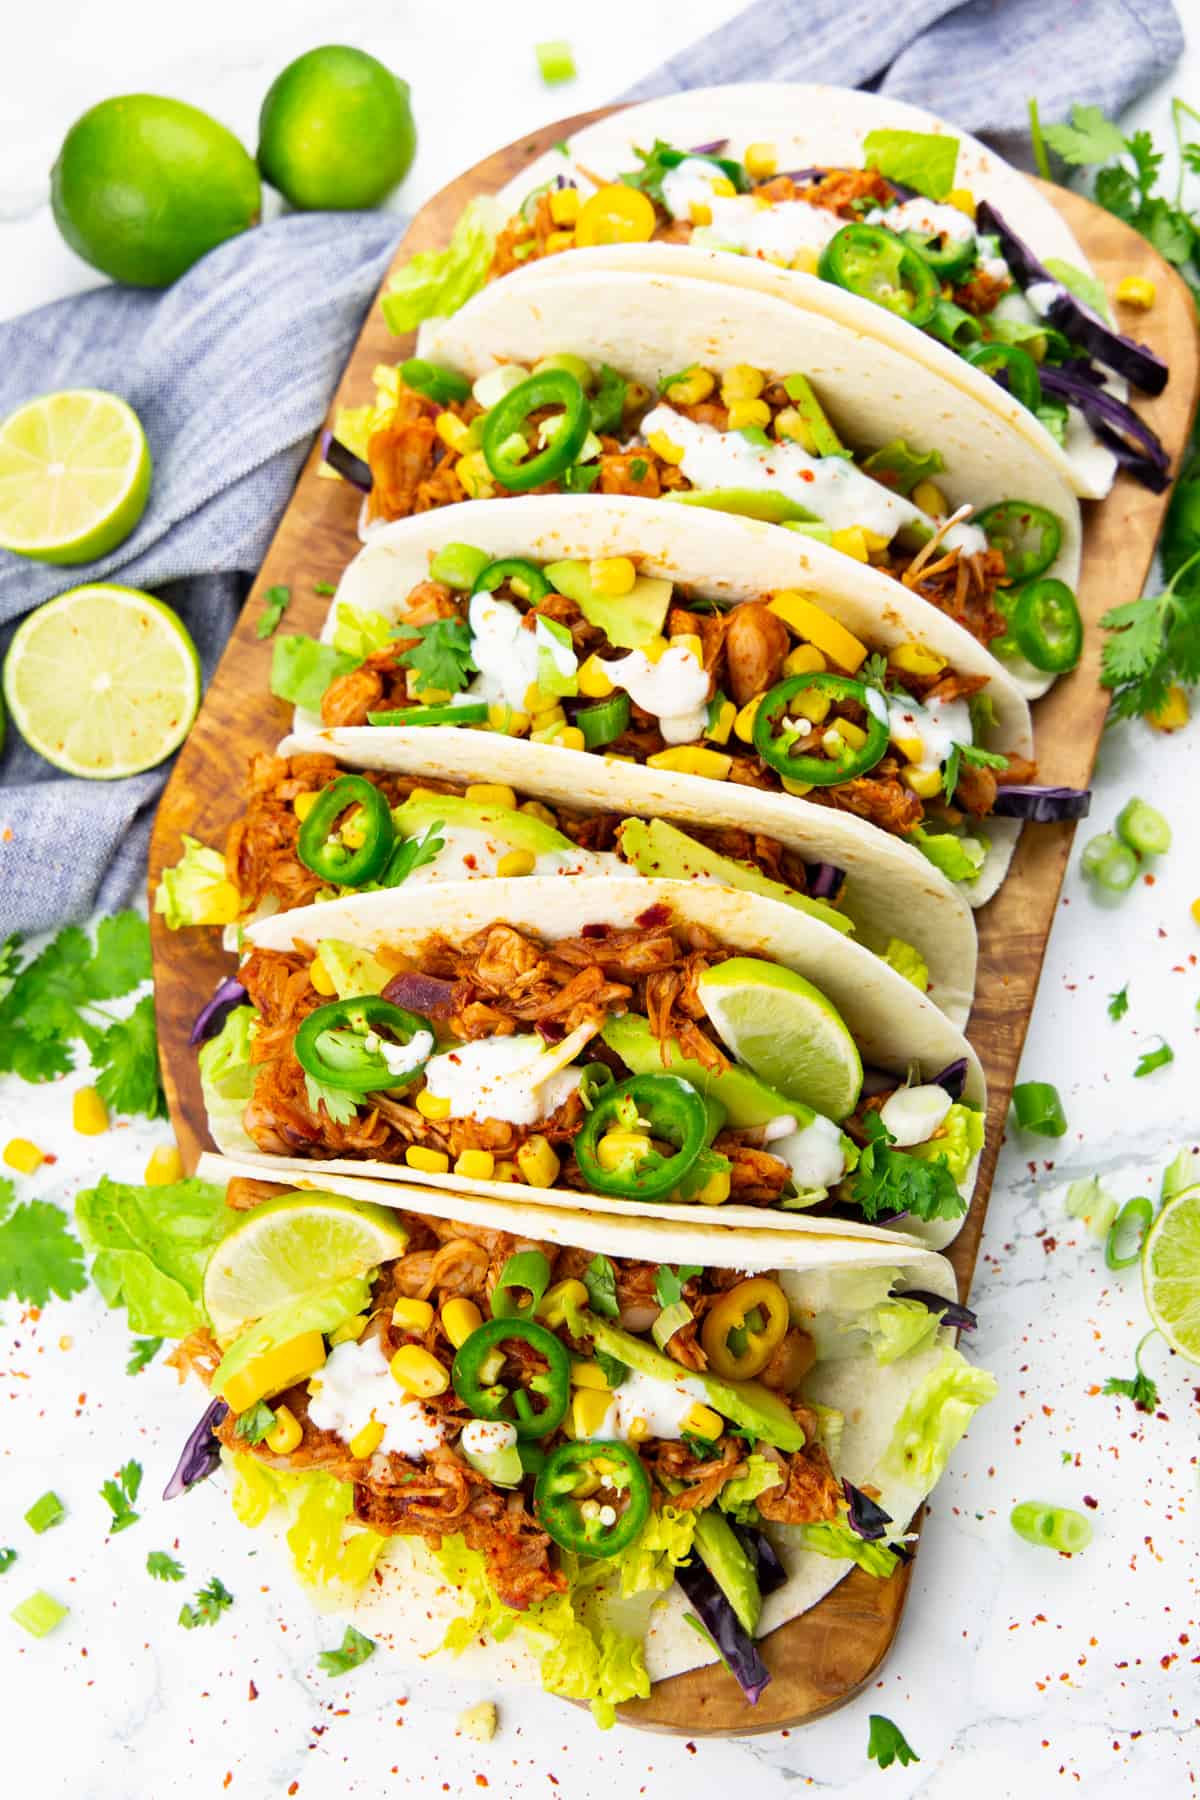 six jackfruit tacos on a wooden cutting board with limes on the side